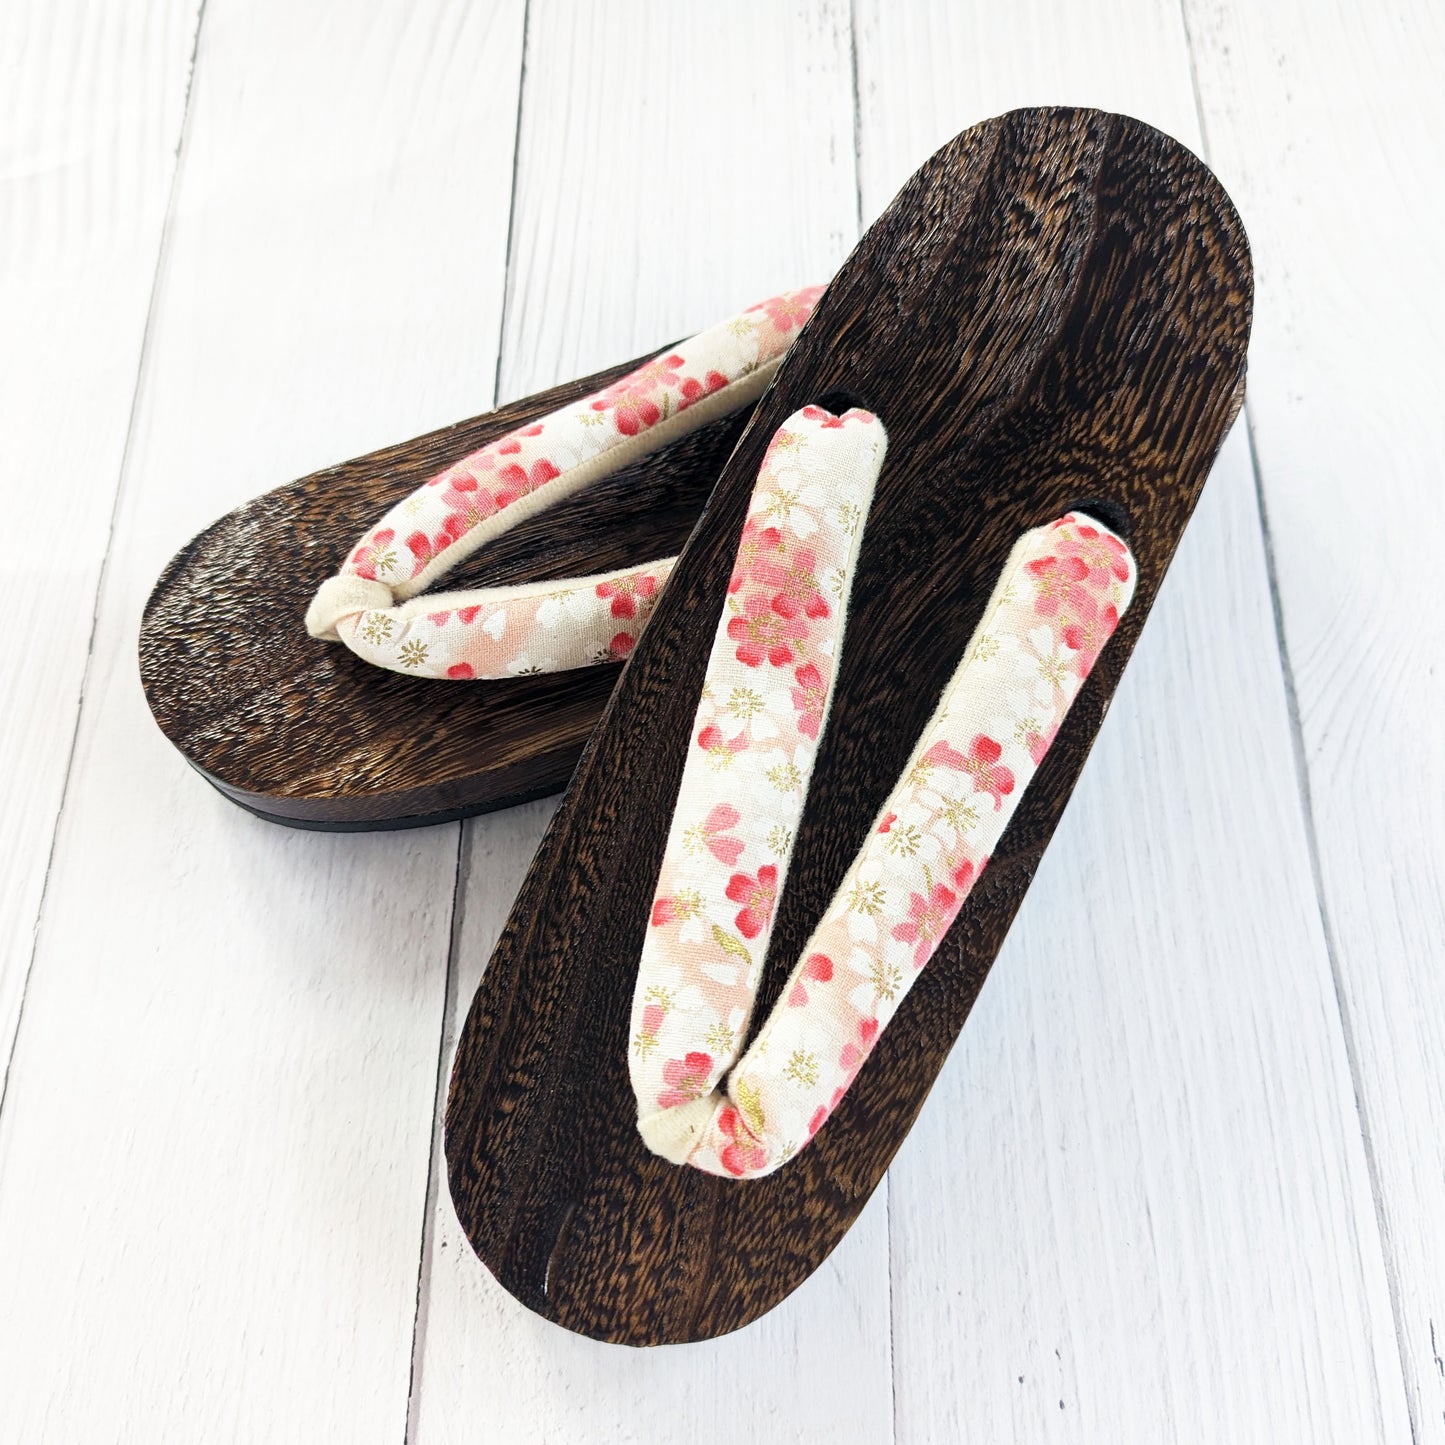 Japanese Geta Sandals for Women - Pink Cherry Blossoms